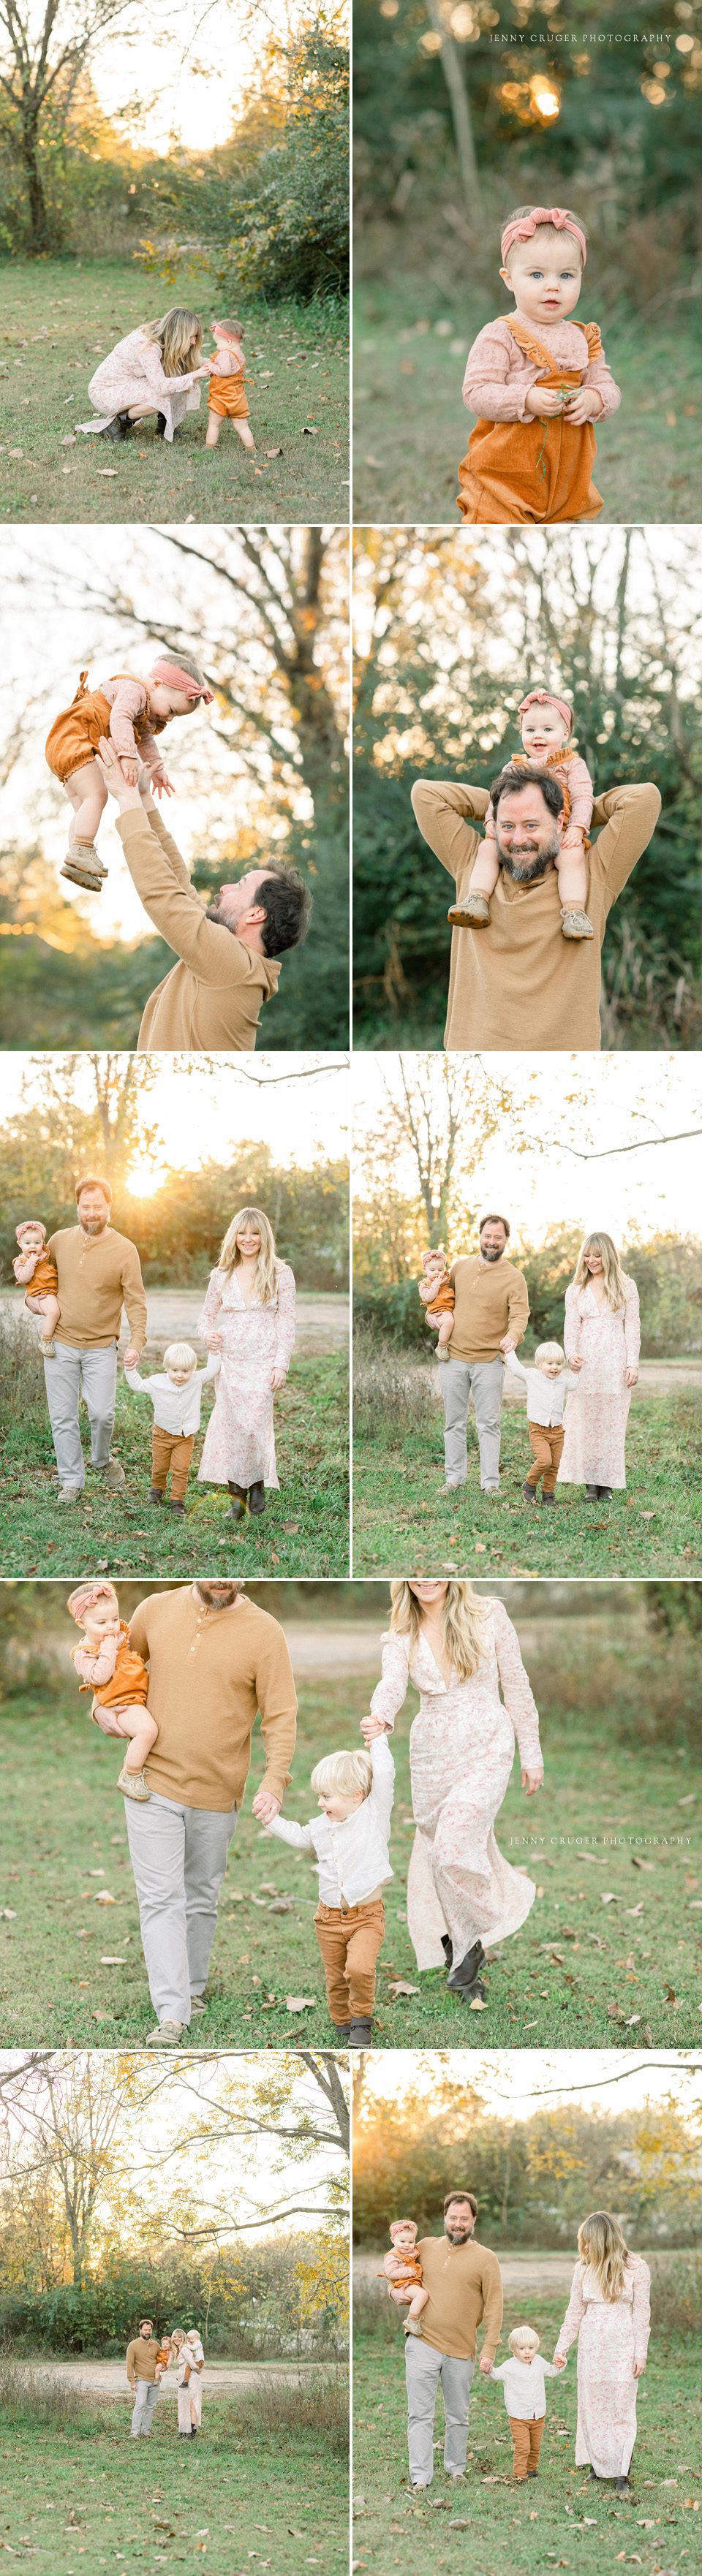 brentwood family photographer 